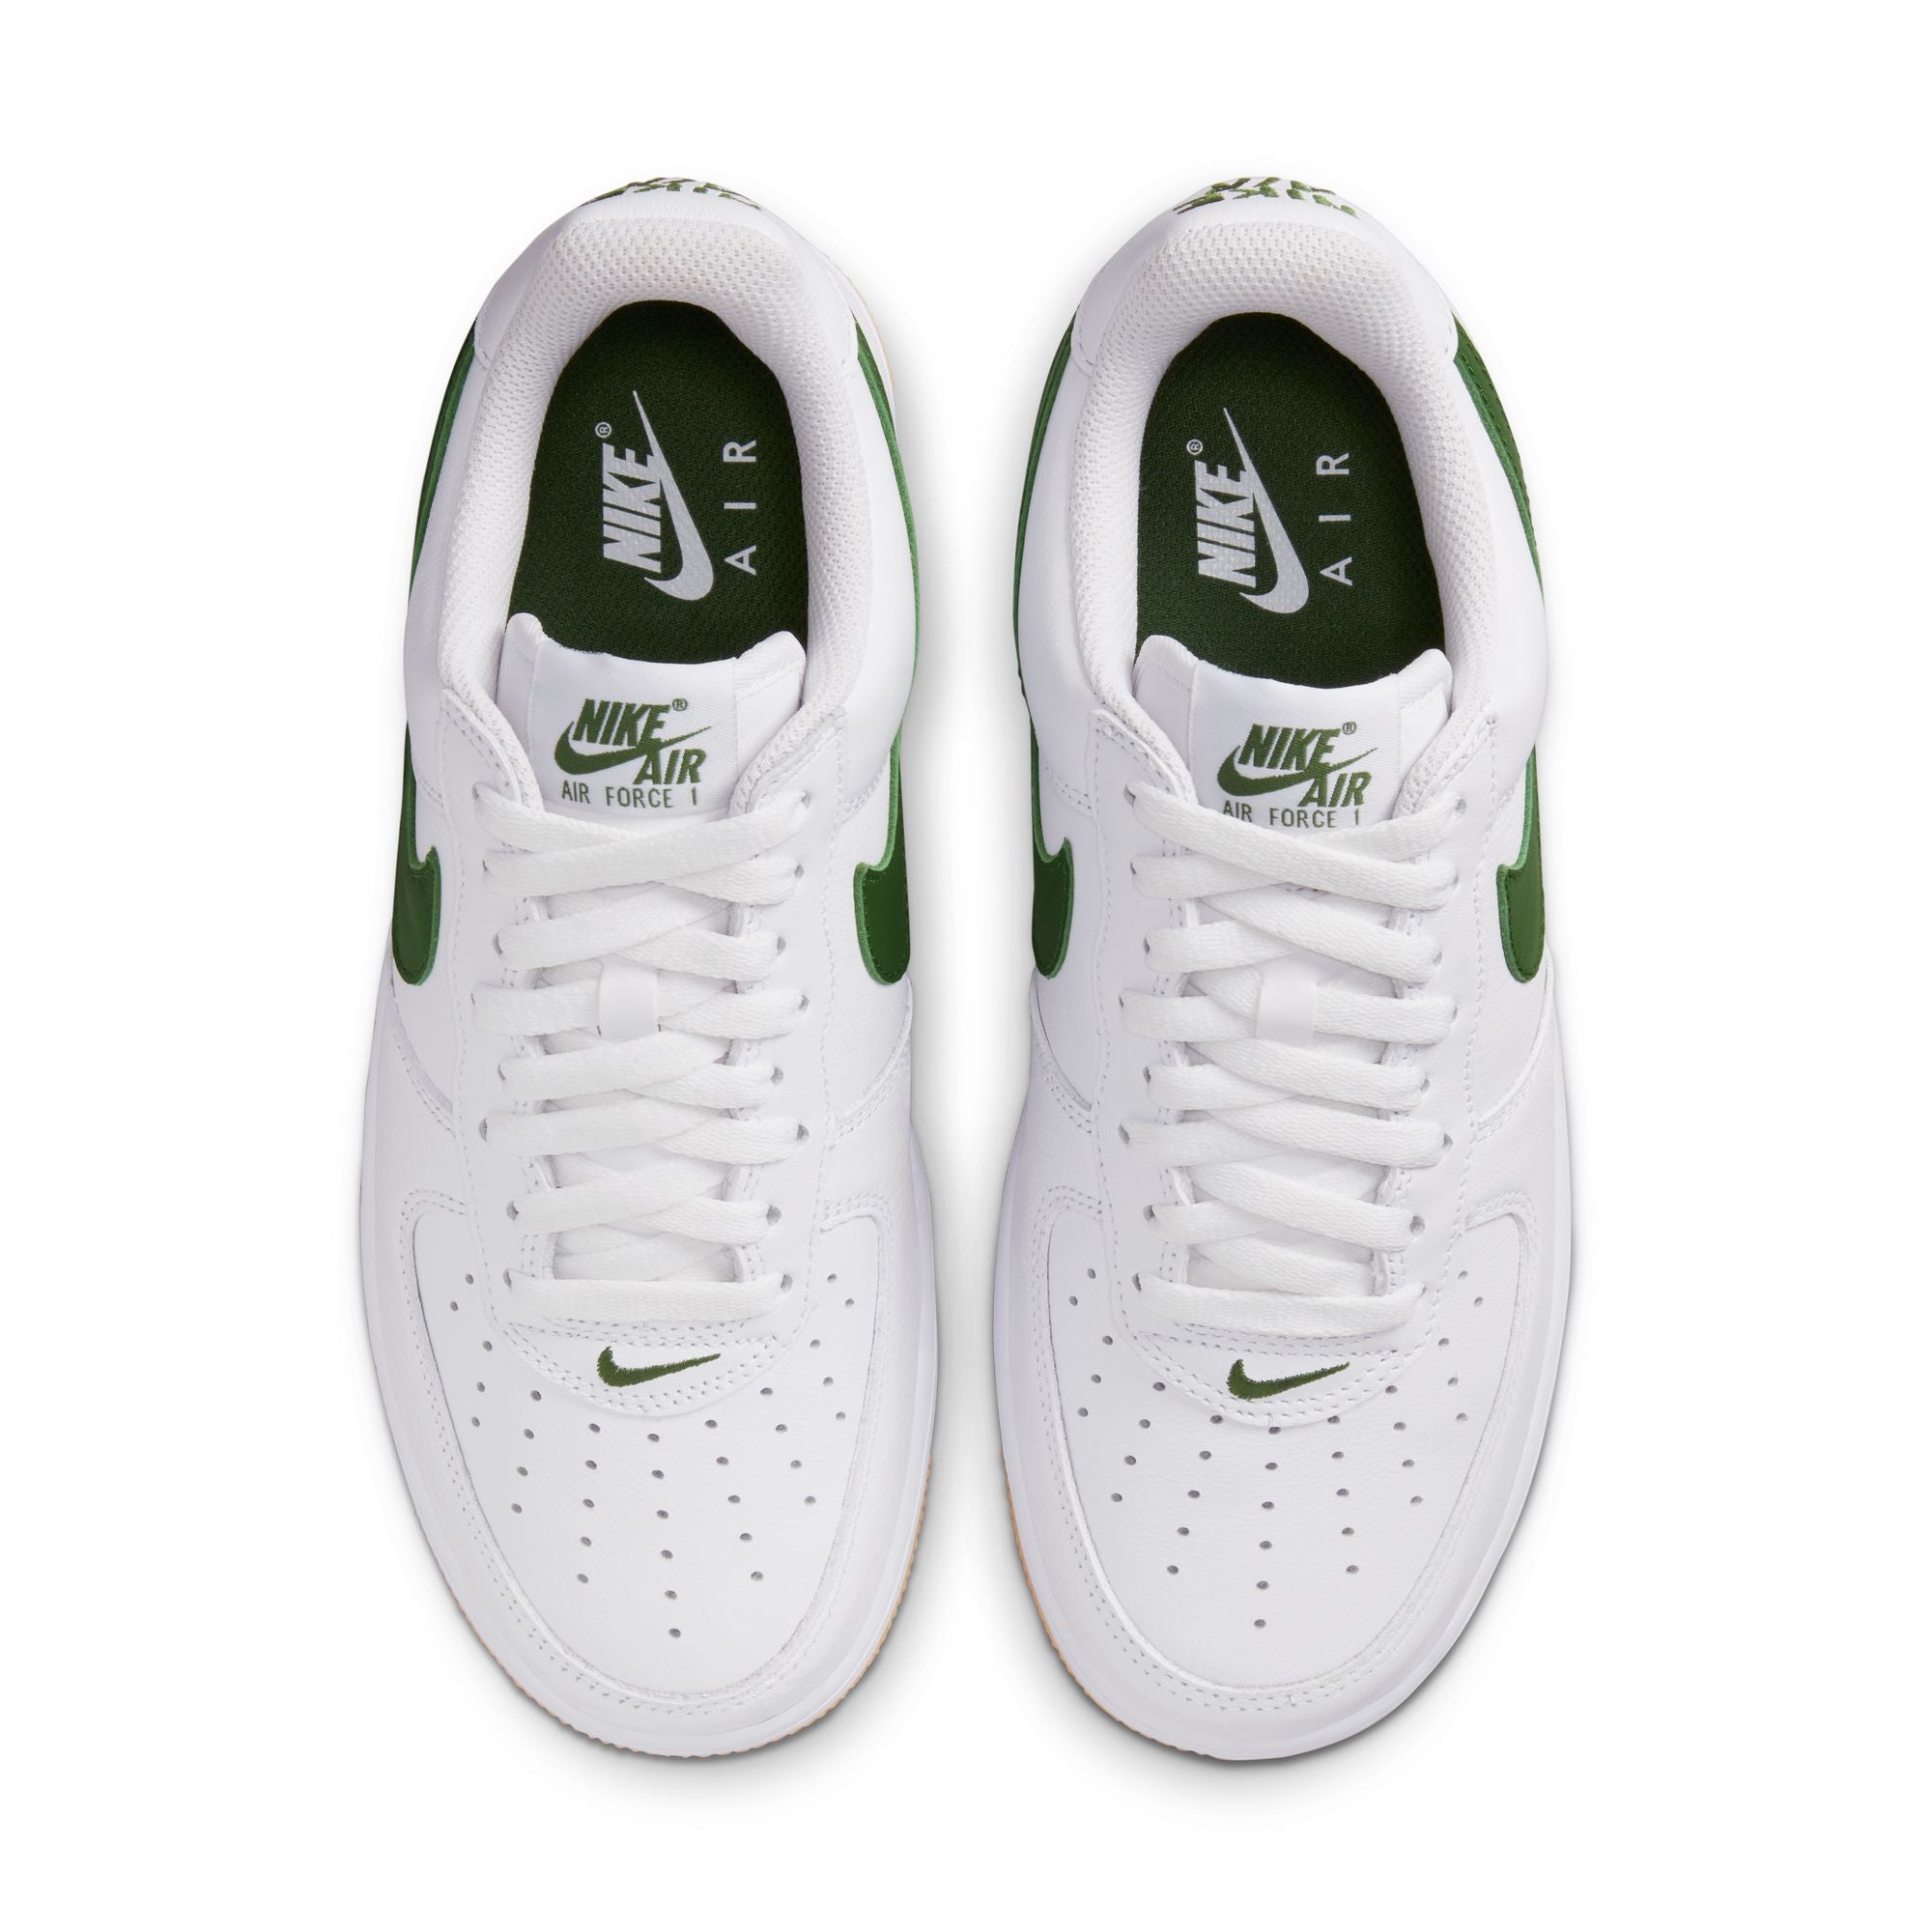 NIKE - Air Force 1 Low Retro Qs - (White/Forest Green-Gum Yellow) view 4